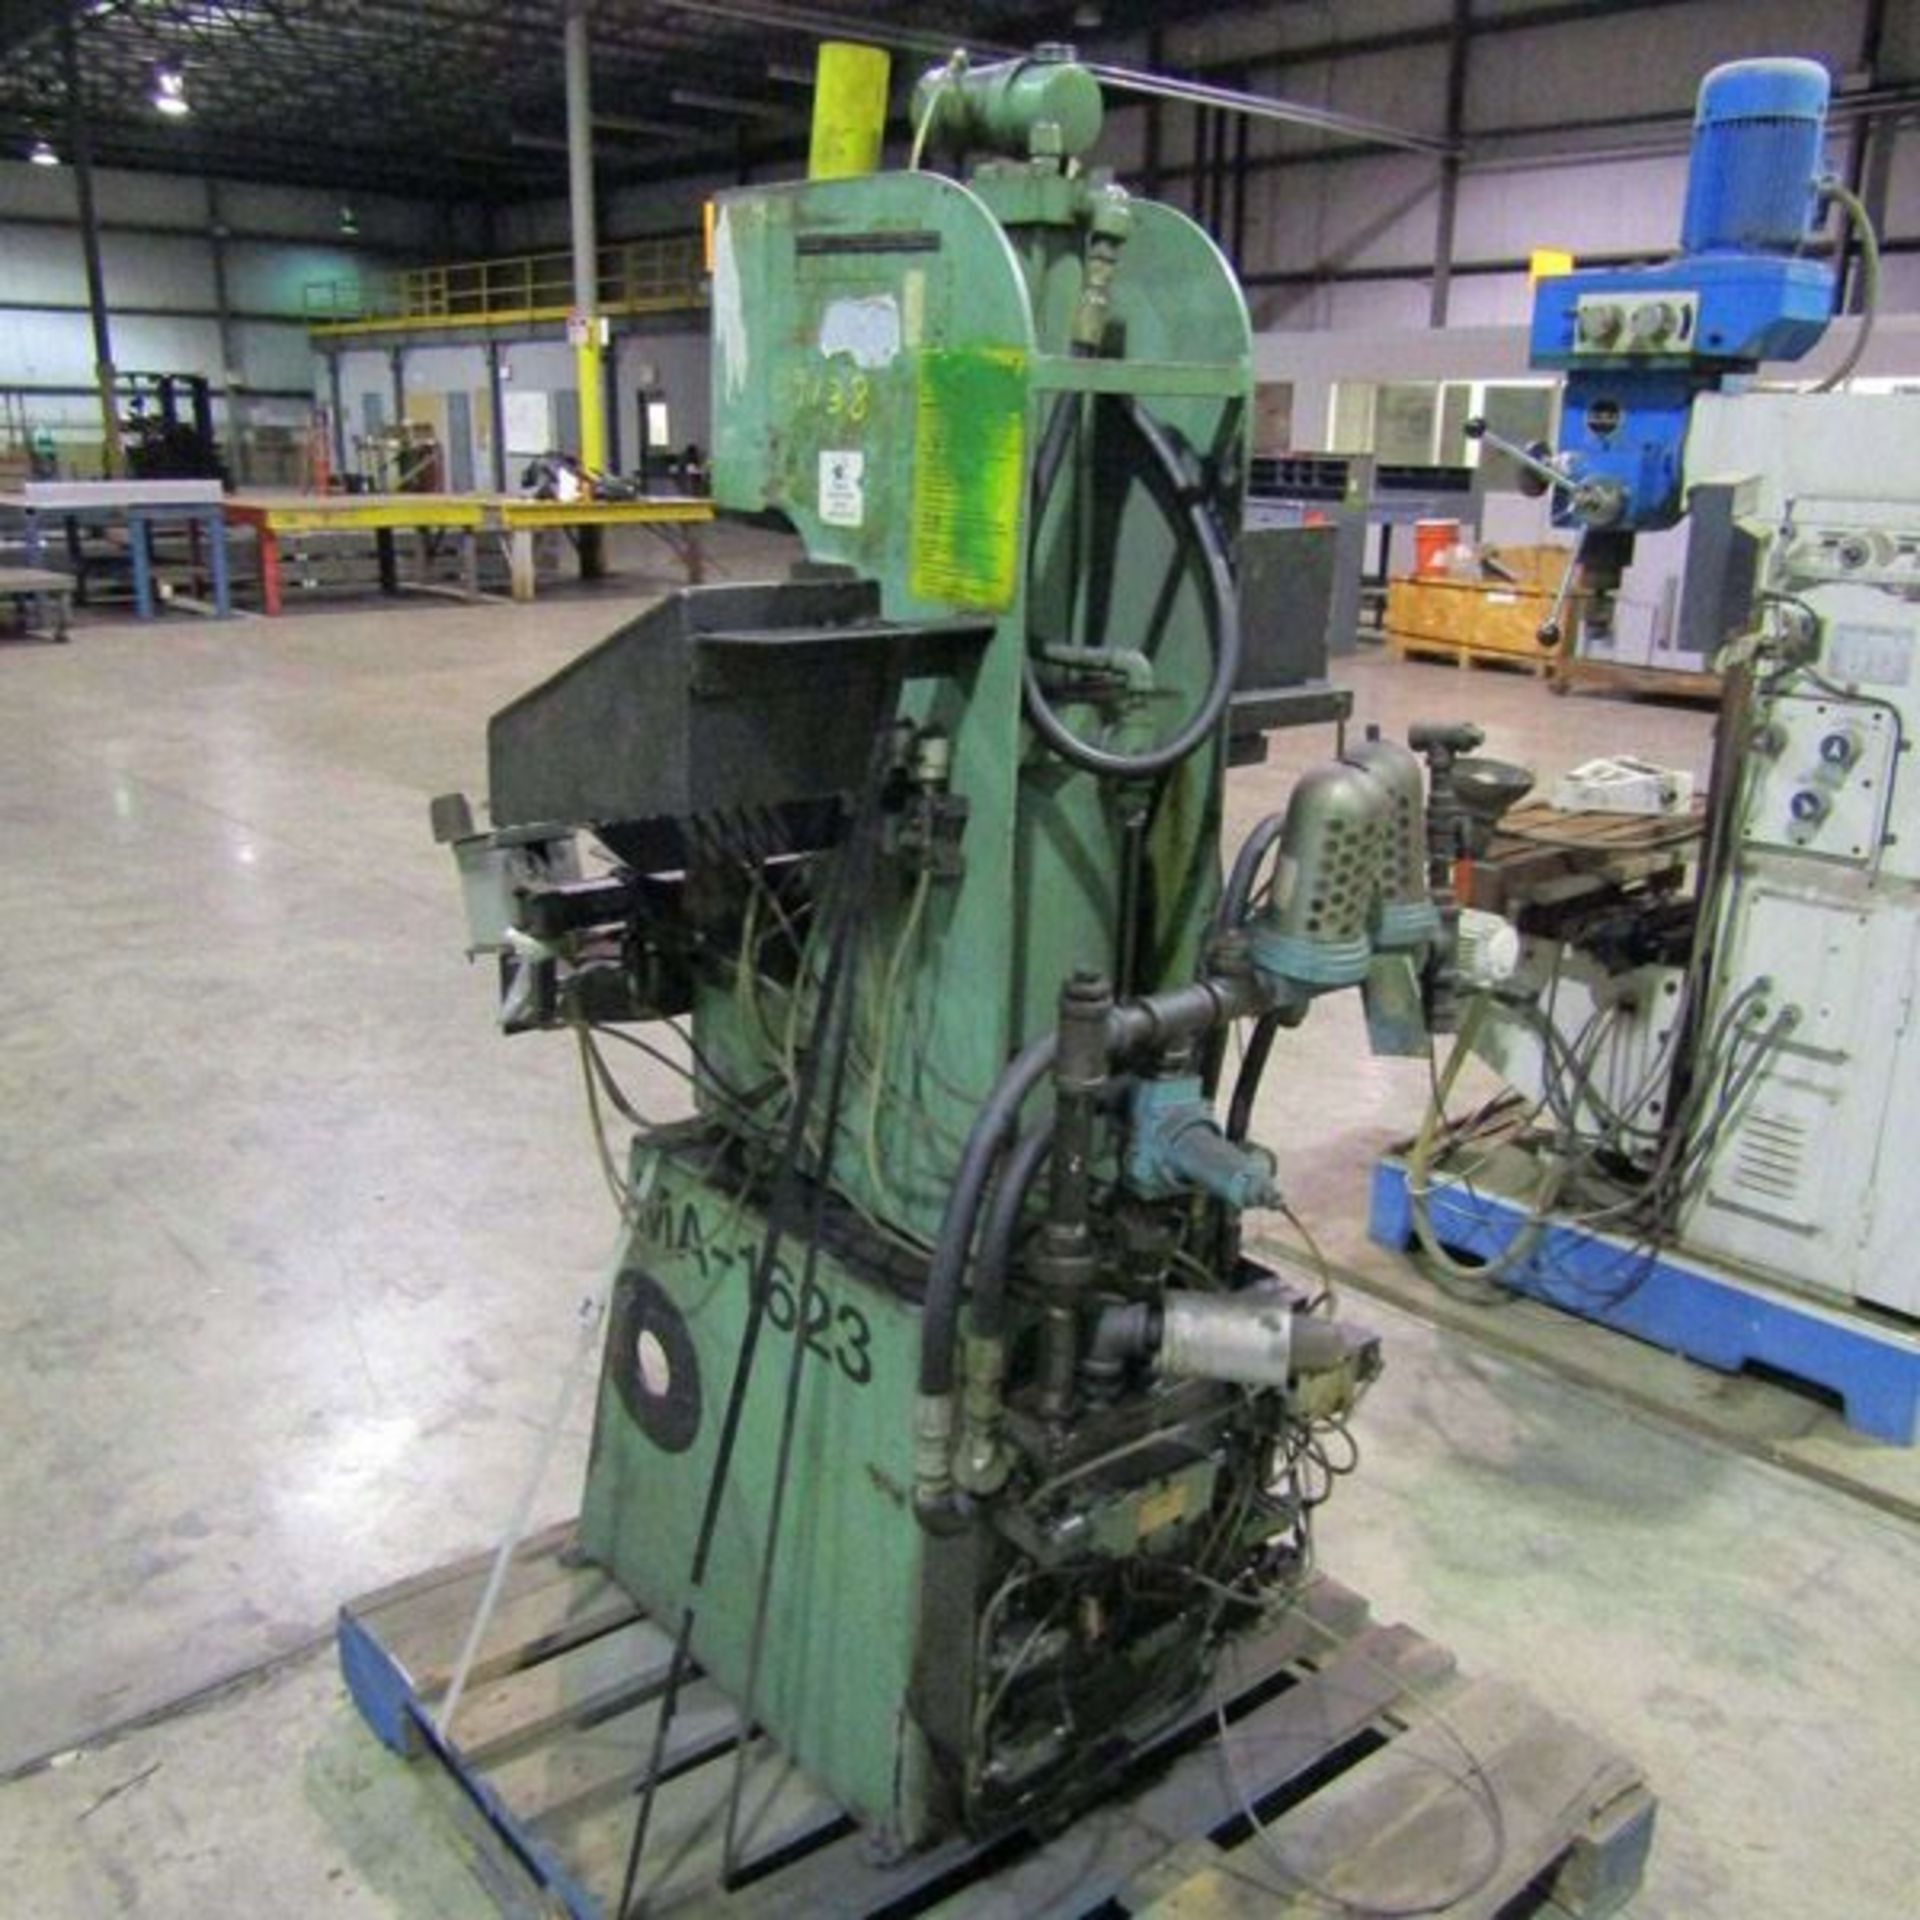 Air Hydraulics Air Over Oil C Frame Press 5.5 Ton x 14'' x 8''. LOADING FEE FOR THIS LOT: $200 - Image 5 of 7